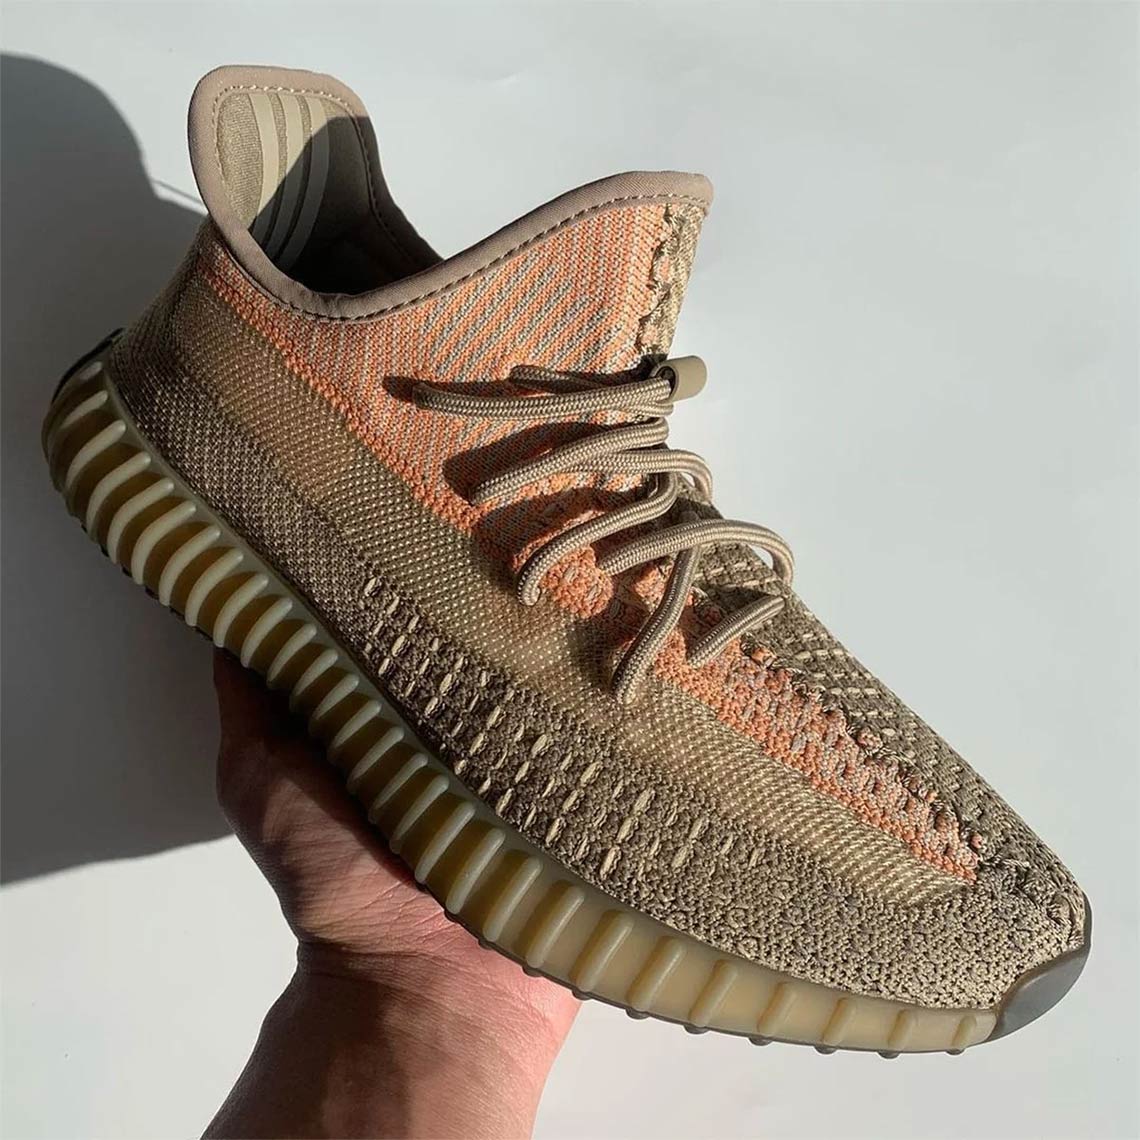 yeezy 350 first